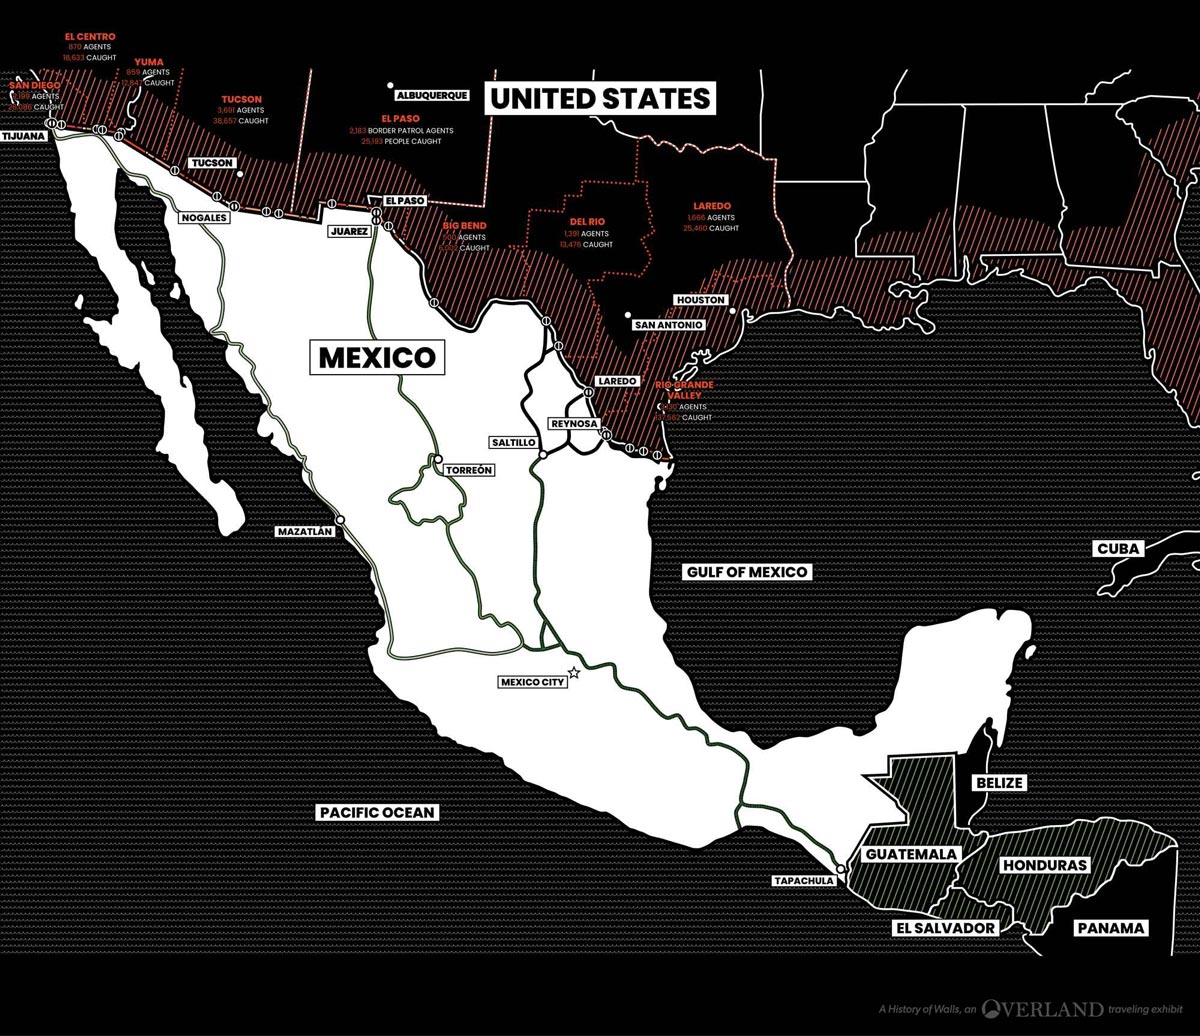 Map displaying the United States, Mexico, Guatemala, Honduras, and El Salvador border along with information regarding U.S. border patrol agents and immigrants caught.